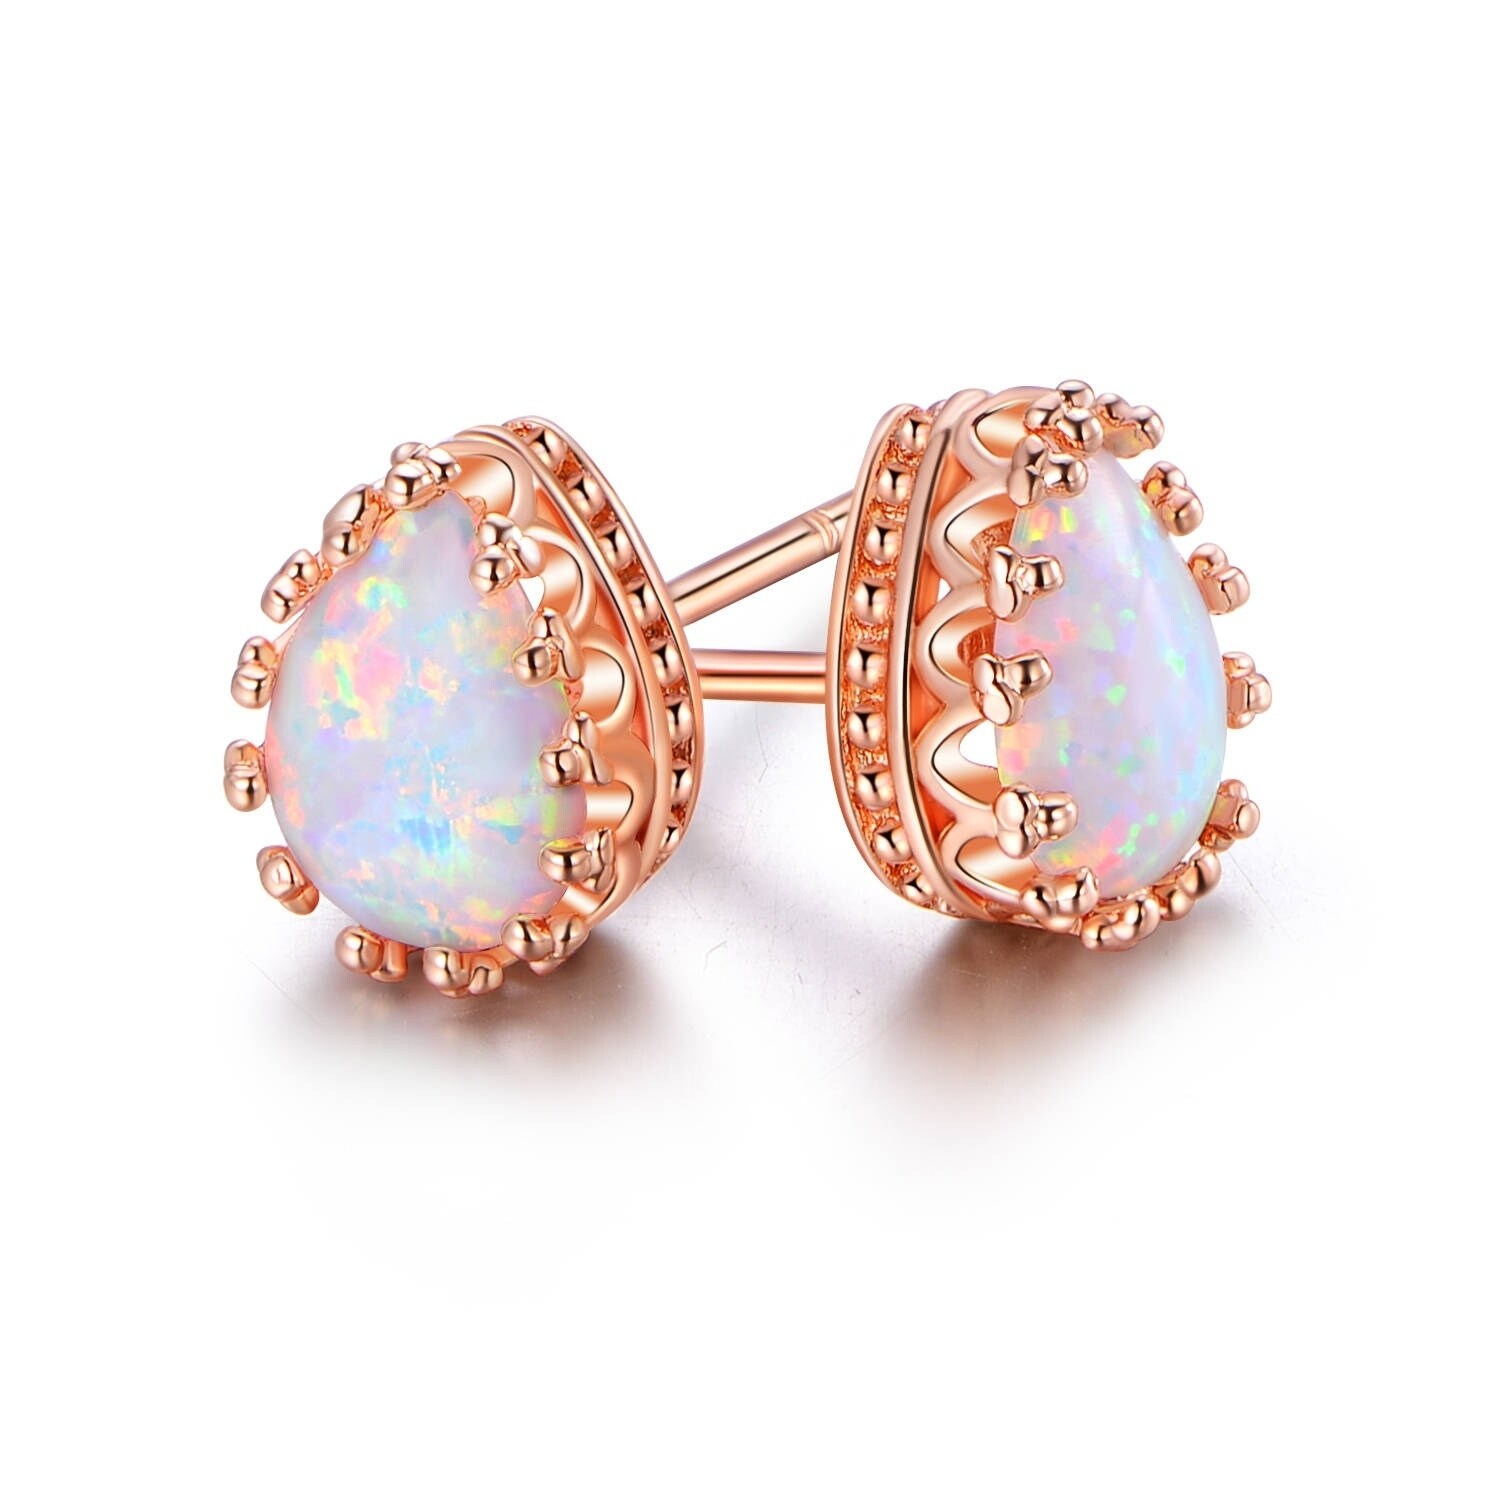 Details about   Sparkling White Fire Opal Earrings Women Wedding Jewelry Gift 14K Rose Gold